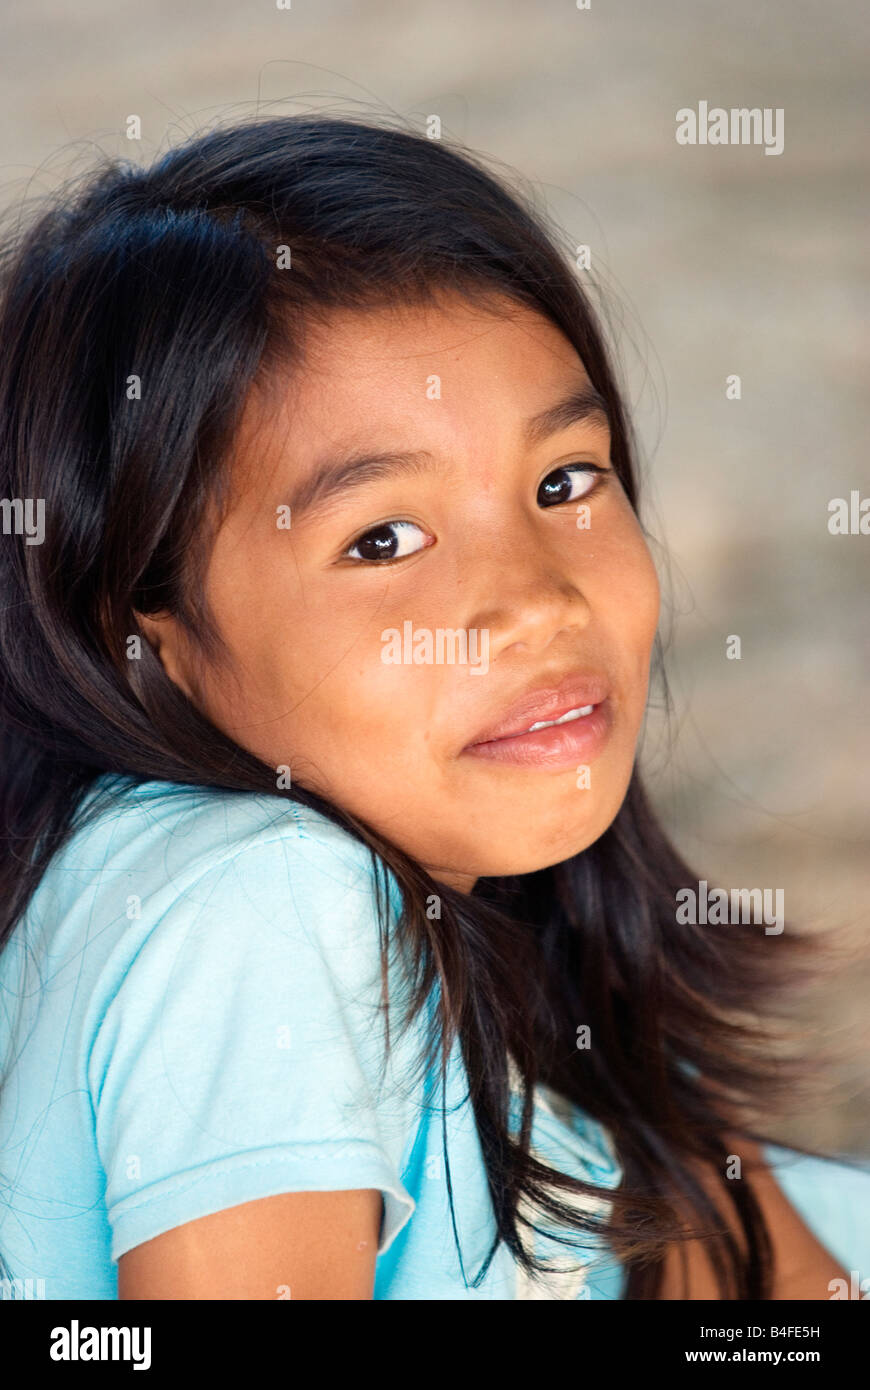 Portrait Of A Young Beautifull Indonesian Girl Looking With A Very 